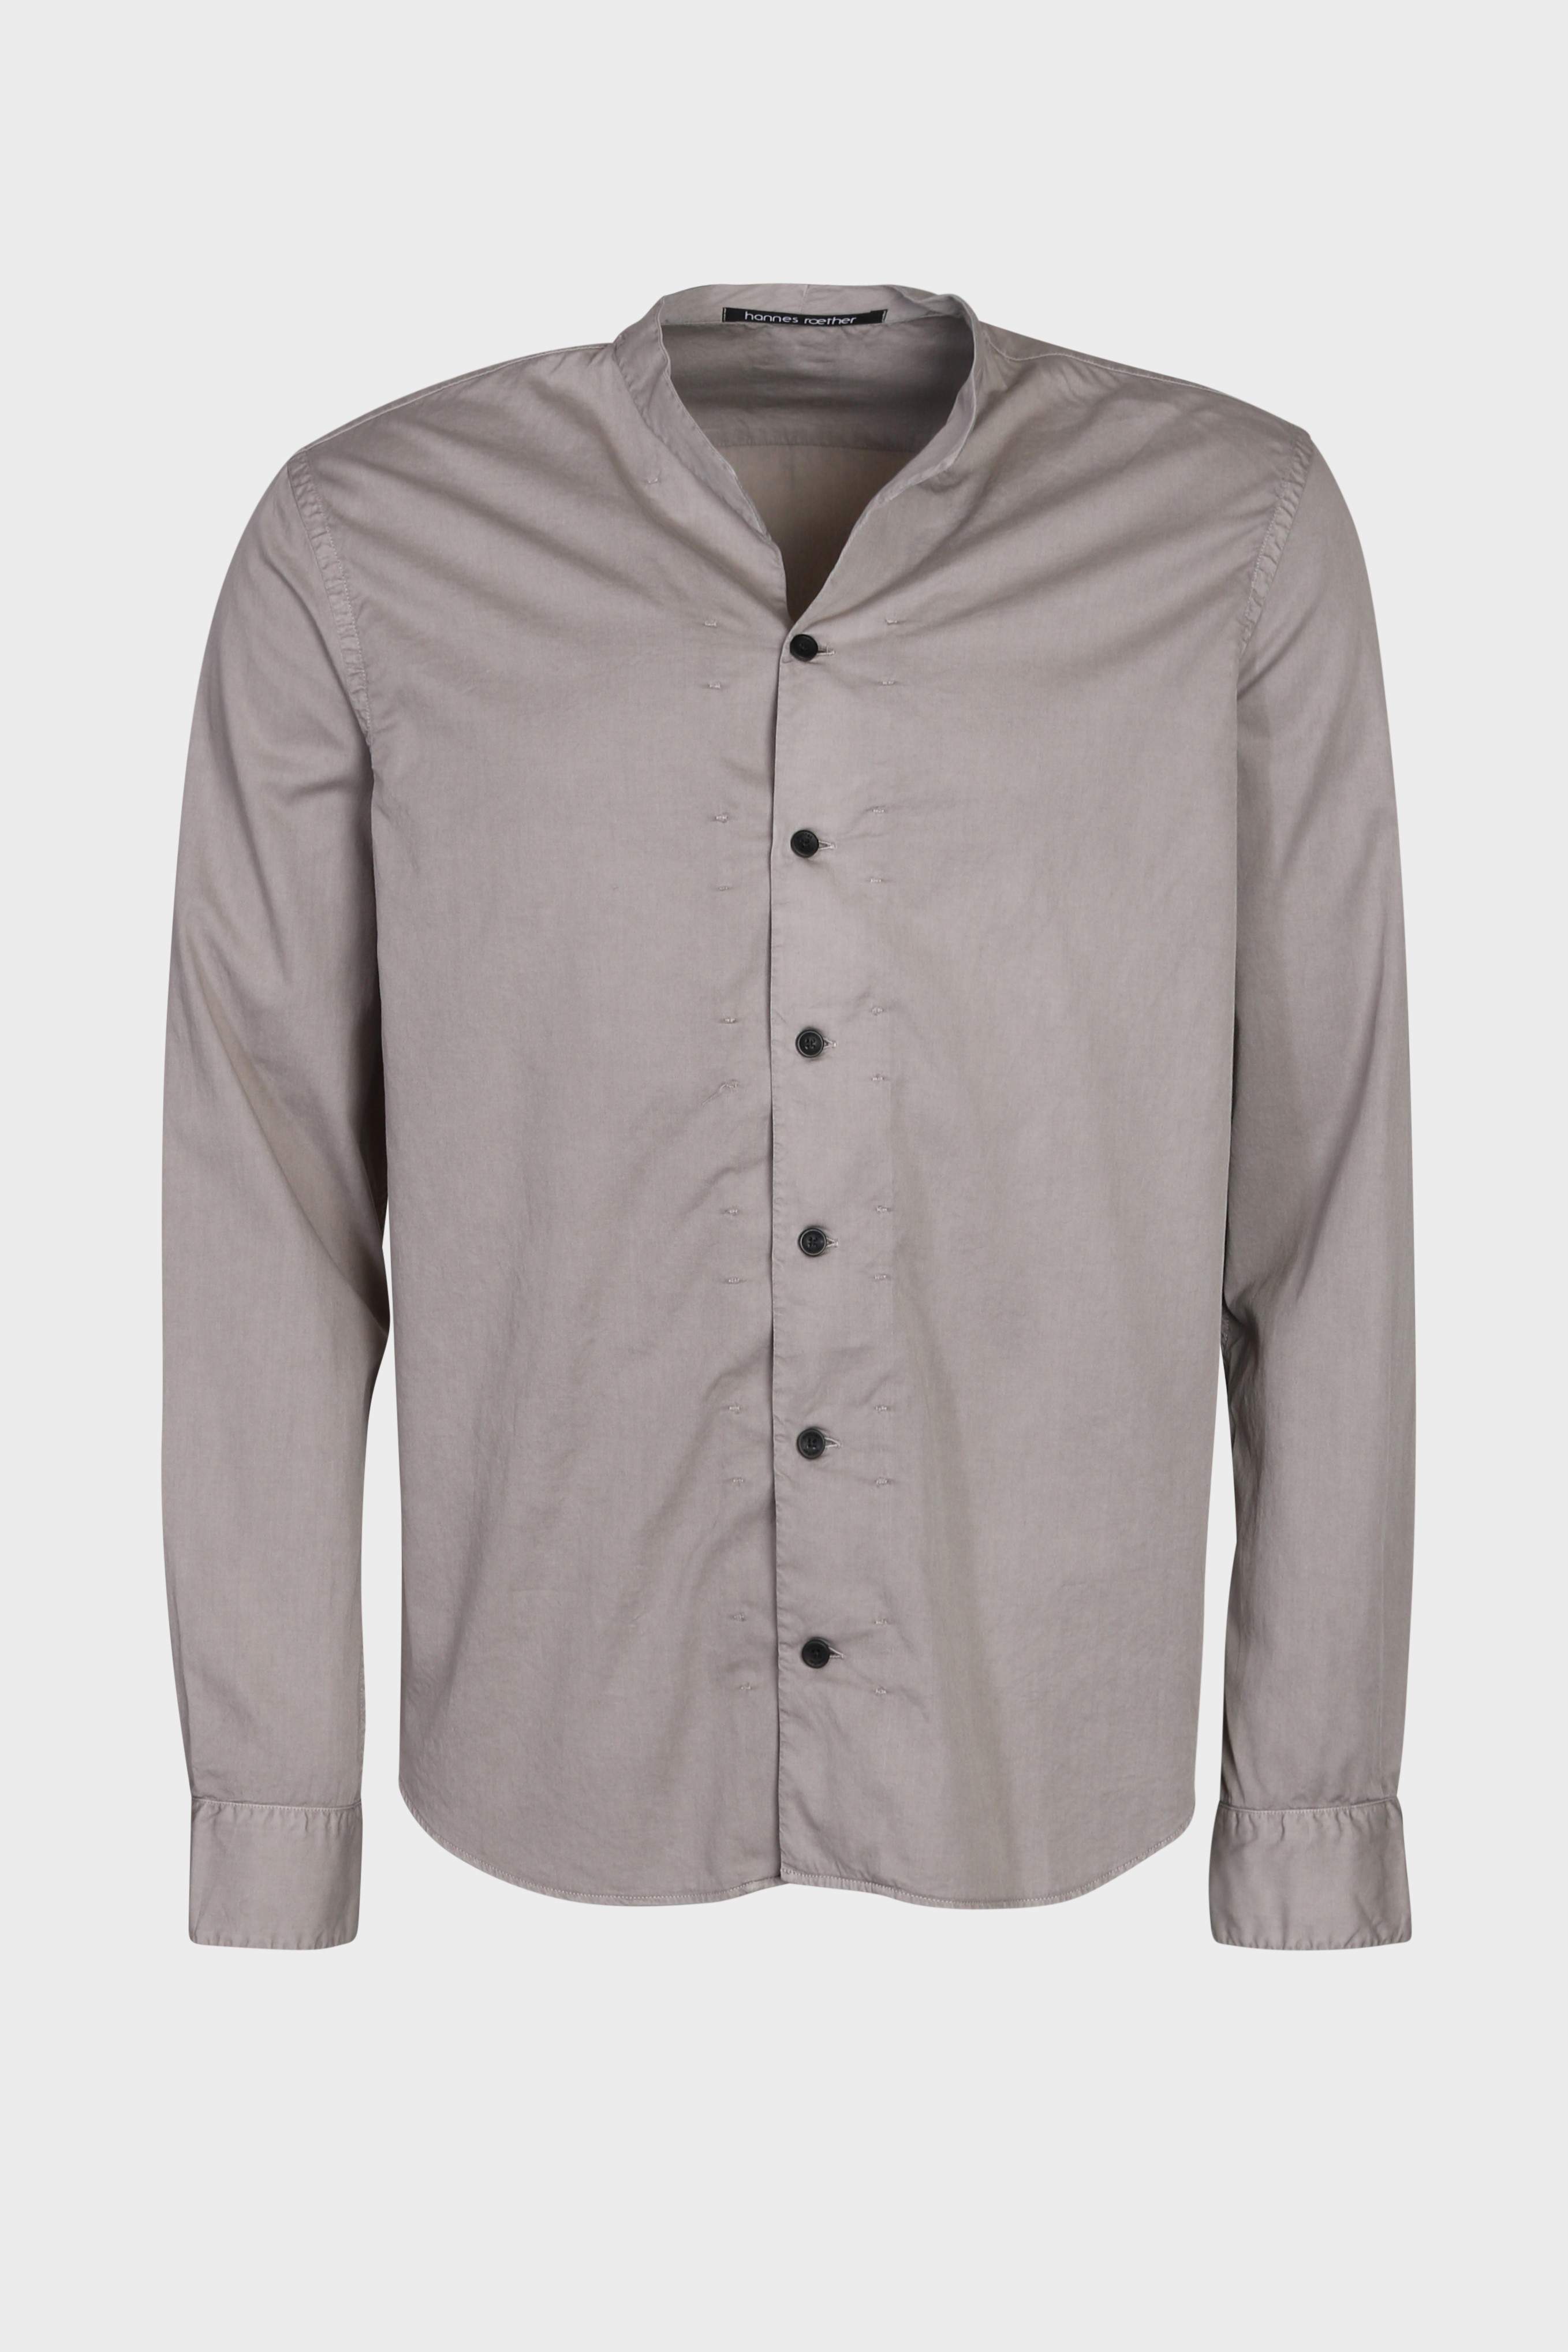 HANNES ROETHER Cotton Shirt in Taupe XL